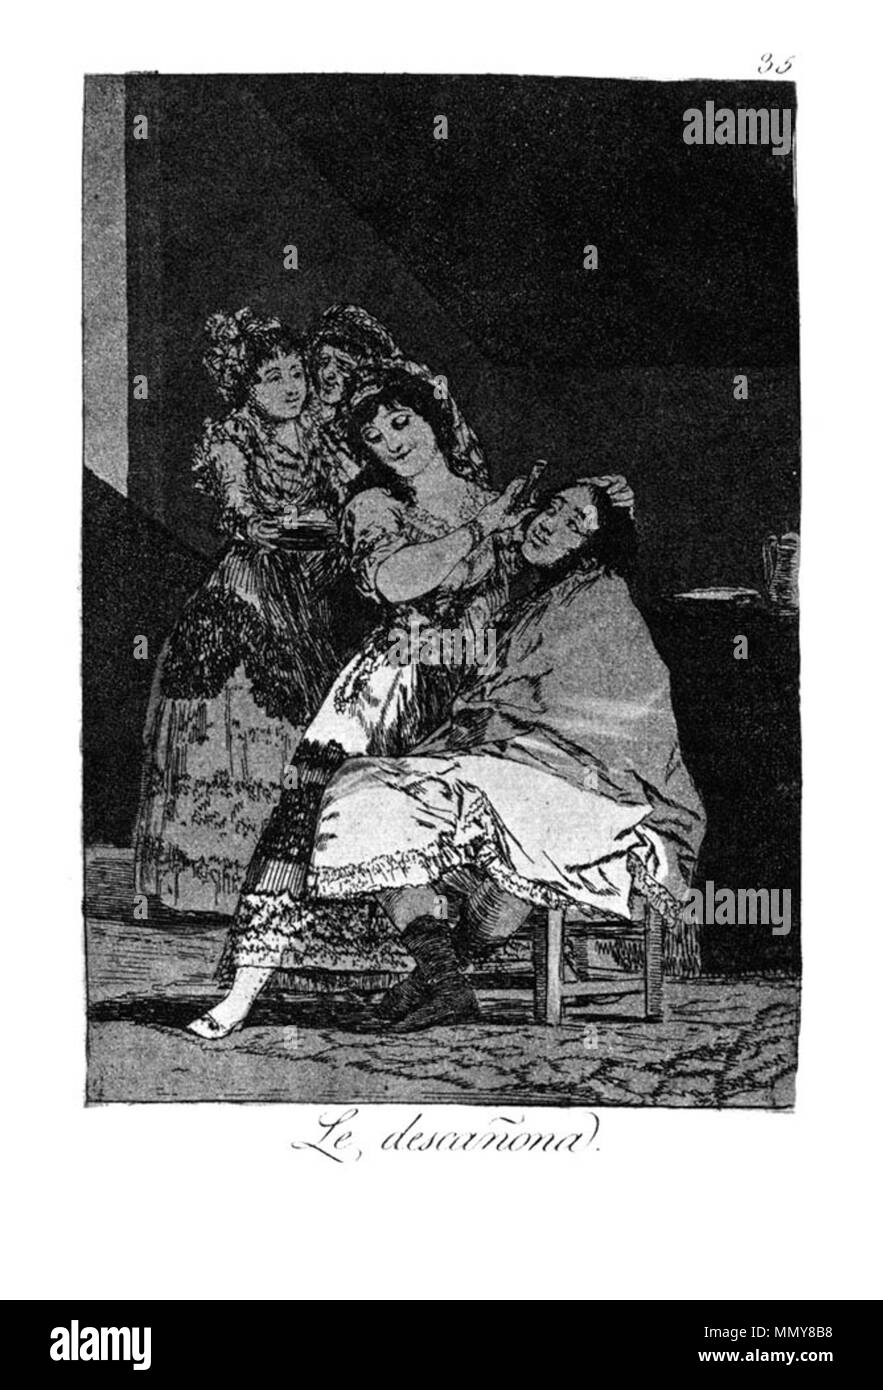 . Los Caprichos is a set of 80 aquatint prints created by Francisco Goya for release in 1799.  . 1799.   Francisco Goya  (1746–1828)      Alternative names Francisco Goya Lucientes, Francisco de Goya y Lucientes, Francisco José Goya Lucientes  Description Spanish painter, printmaker, lithographer, engraver and etcher  Date of birth/death 30 March 1746 16 April 1828  Location of birth/death Fuendetodos Bordeaux  Work location Madrid, Zaragoza, Bordeaux  Authority control  : Q5432 VIAF:?54343141 ISNI:?0000 0001 2280 1608 ULAN:?500118936 LCCN:?n79003363 NLA:?36545788 WorldCat Goya - Caprichos (35 Stock Photo